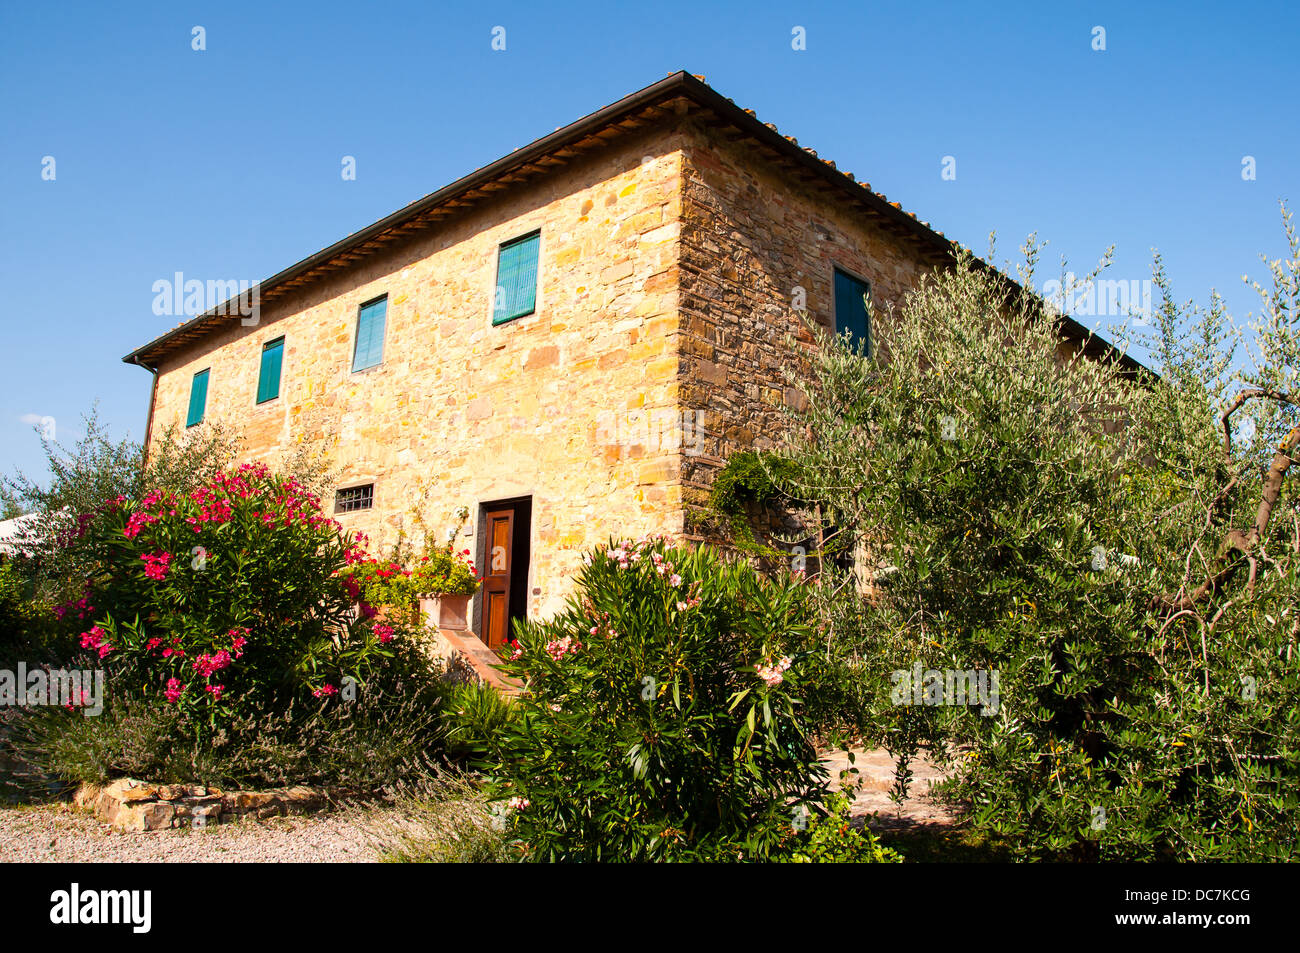 traditional stone house in a hamlet in tuscany, italy Stock Photo